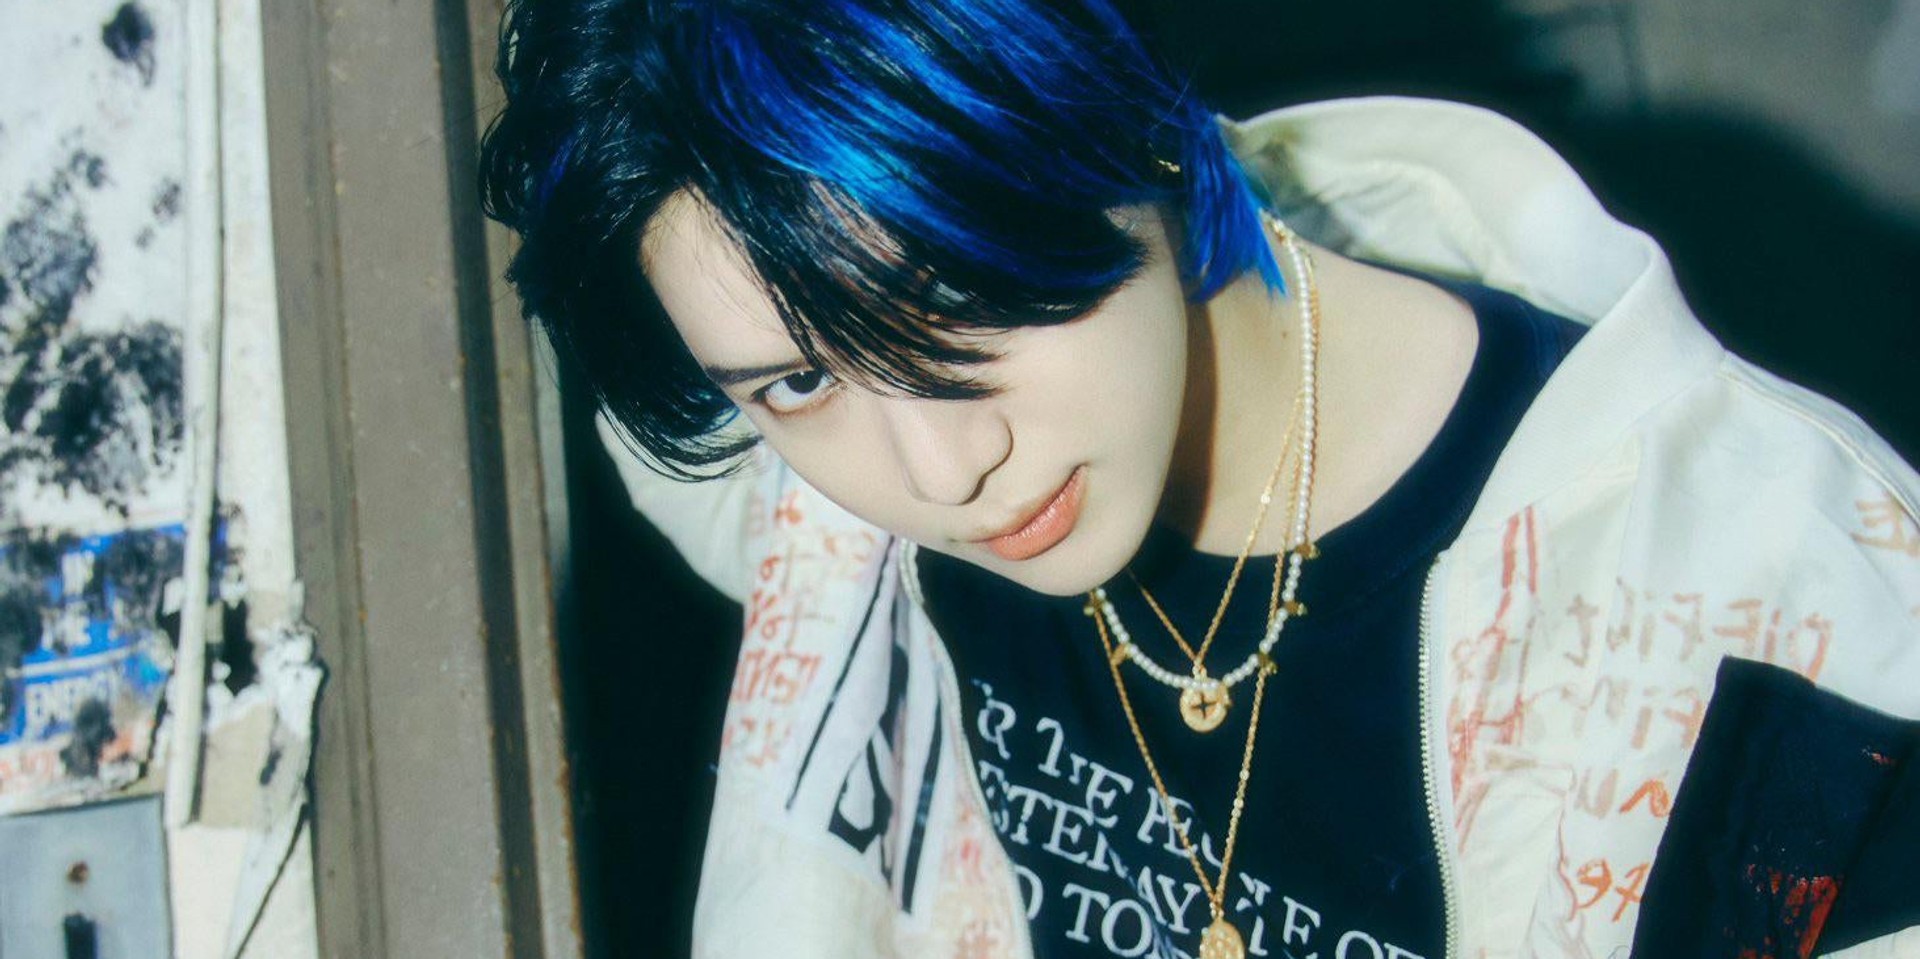 SHINee's Taemin to hold 'N.G.D.A (Never Gonna Dance Again)’ online concert this May
